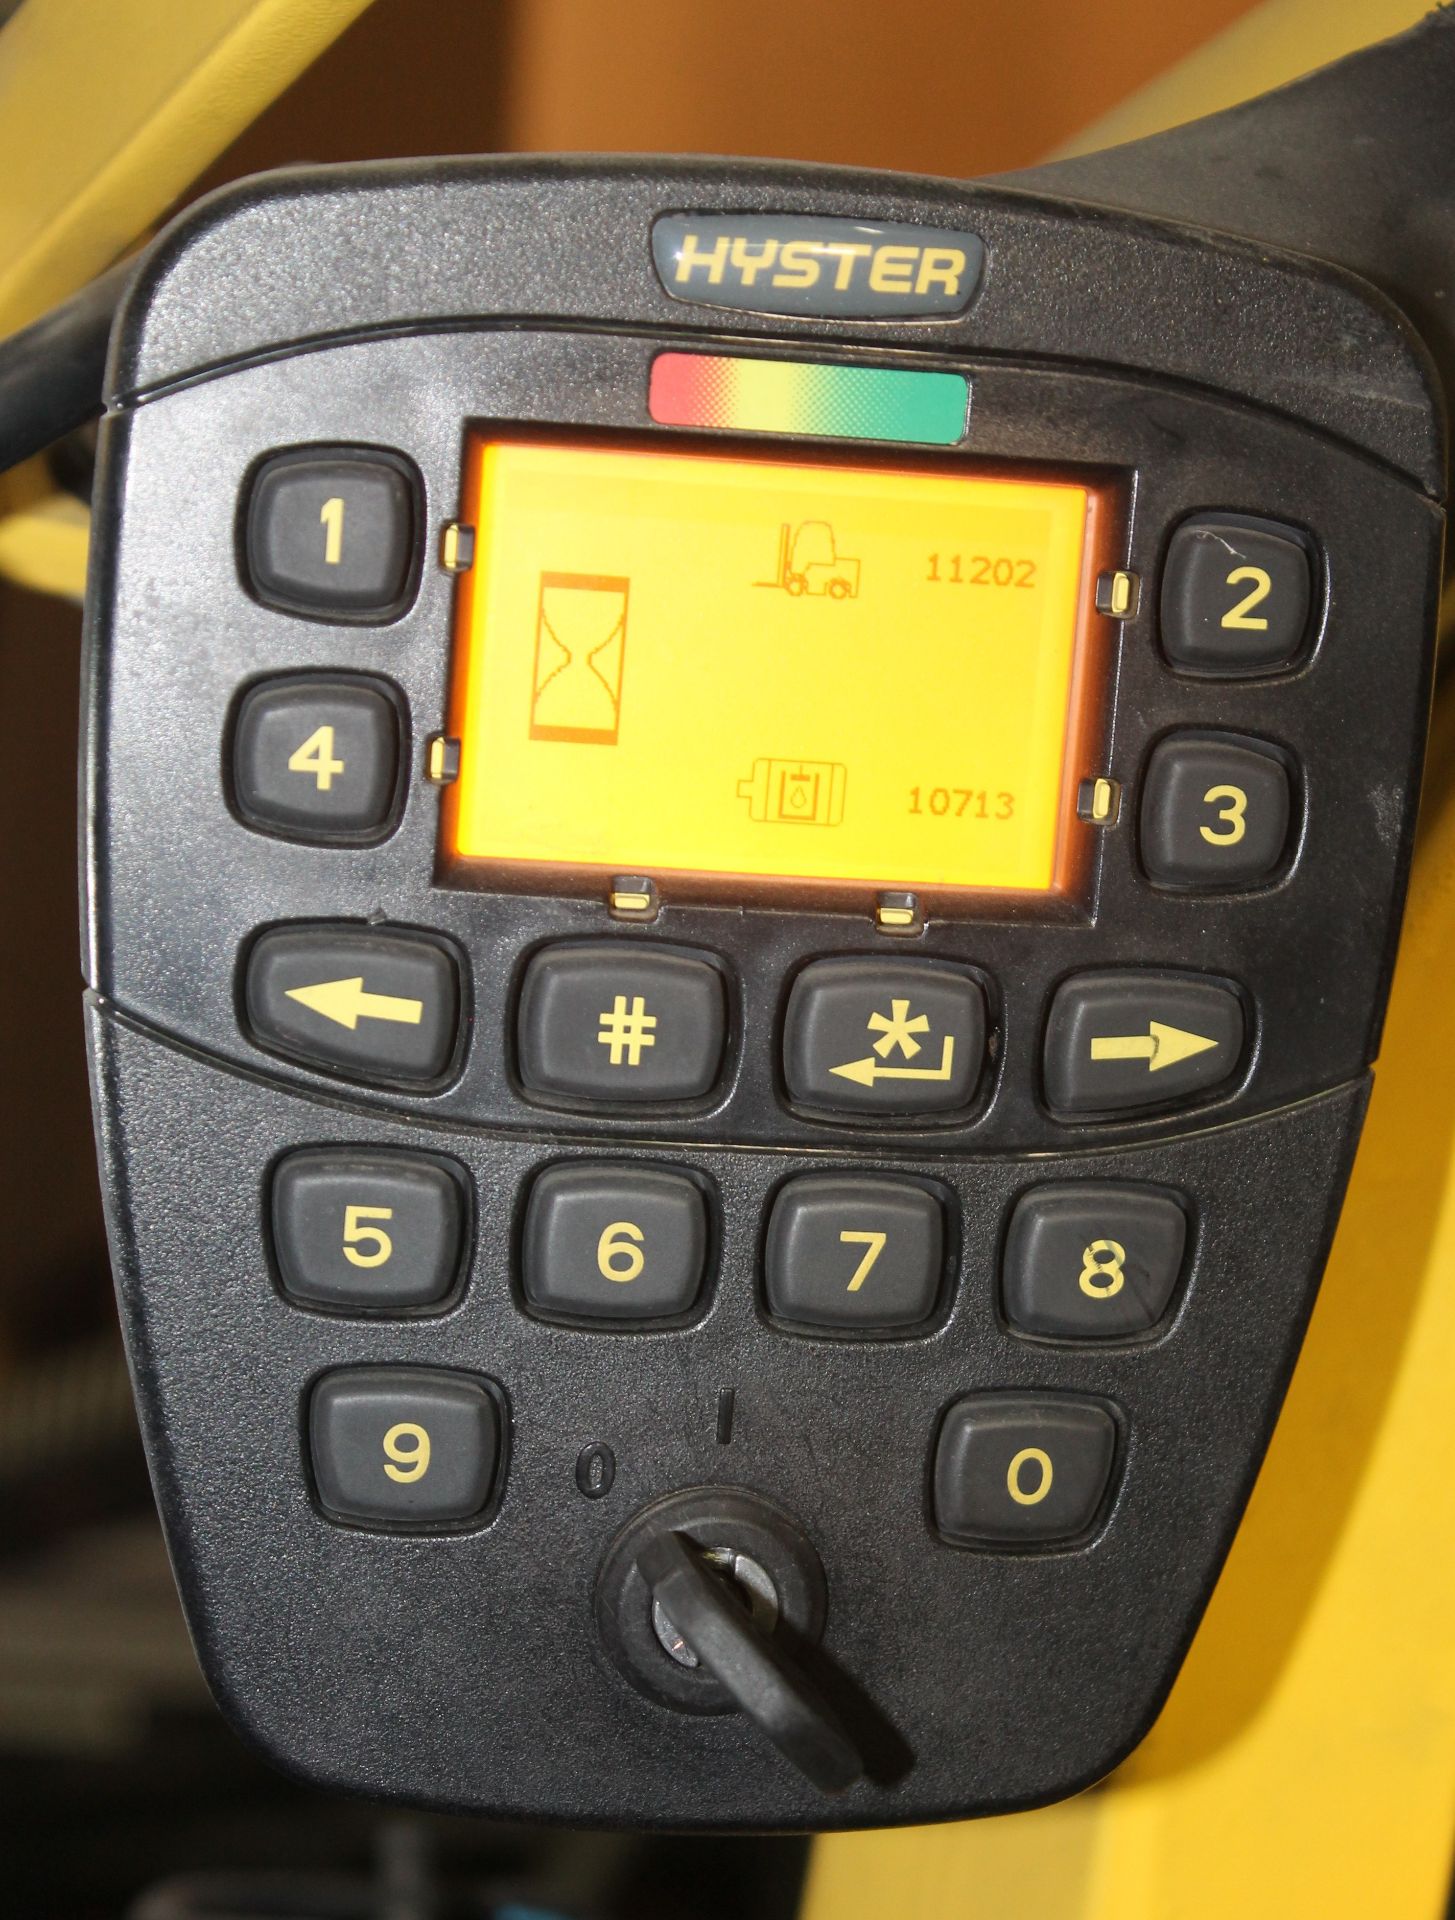 2012 HYSTER 5000 LBS. CAPACITY ELECTRIC FORKLIFT WITH 48 VOLTS BATTERY CHARGER, CLICK TO WATCH VIDEO - Image 2 of 8